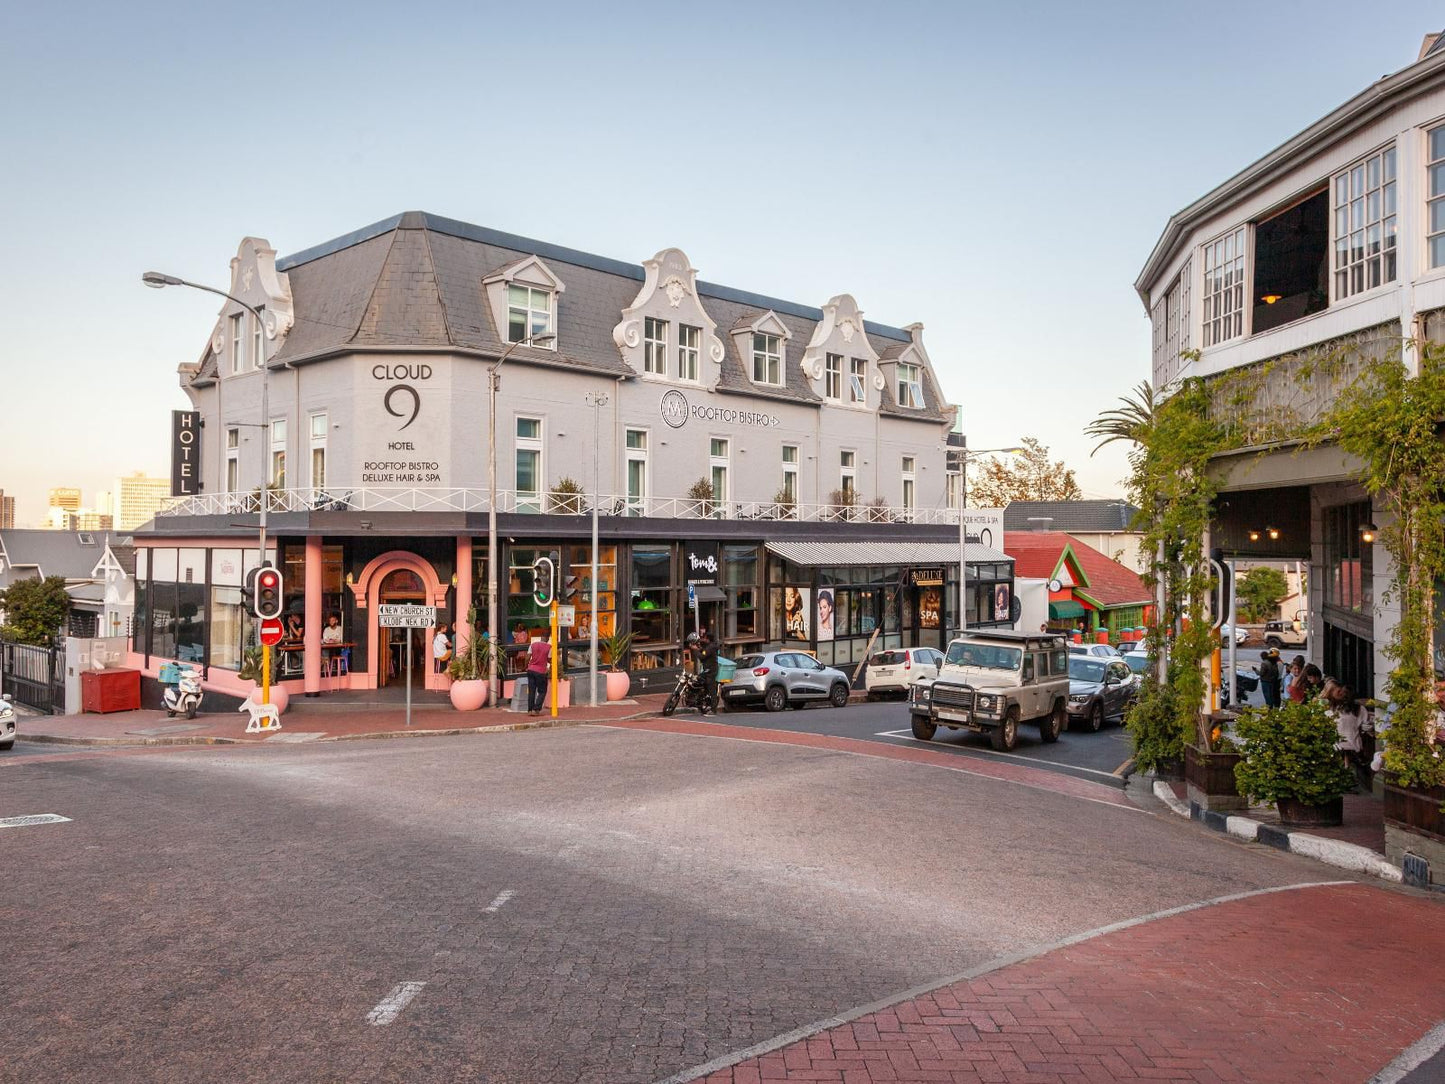 Cloud 9 Boutique Hotel And Spa Tamboerskloof Cape Town Western Cape South Africa House, Building, Architecture, Street